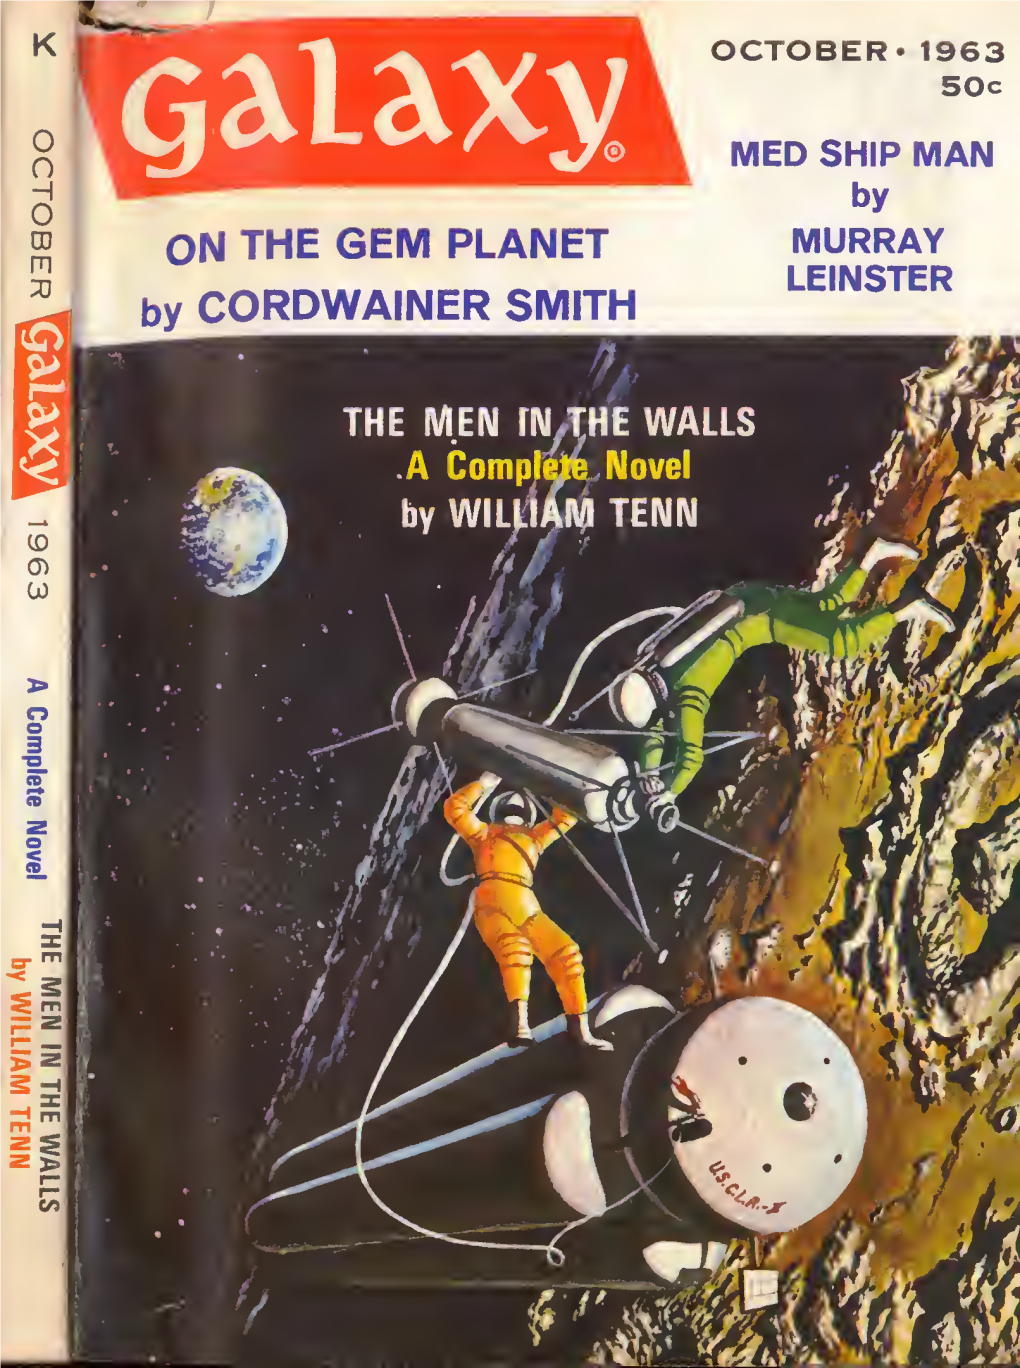 October 1963 Issue of Galaxy